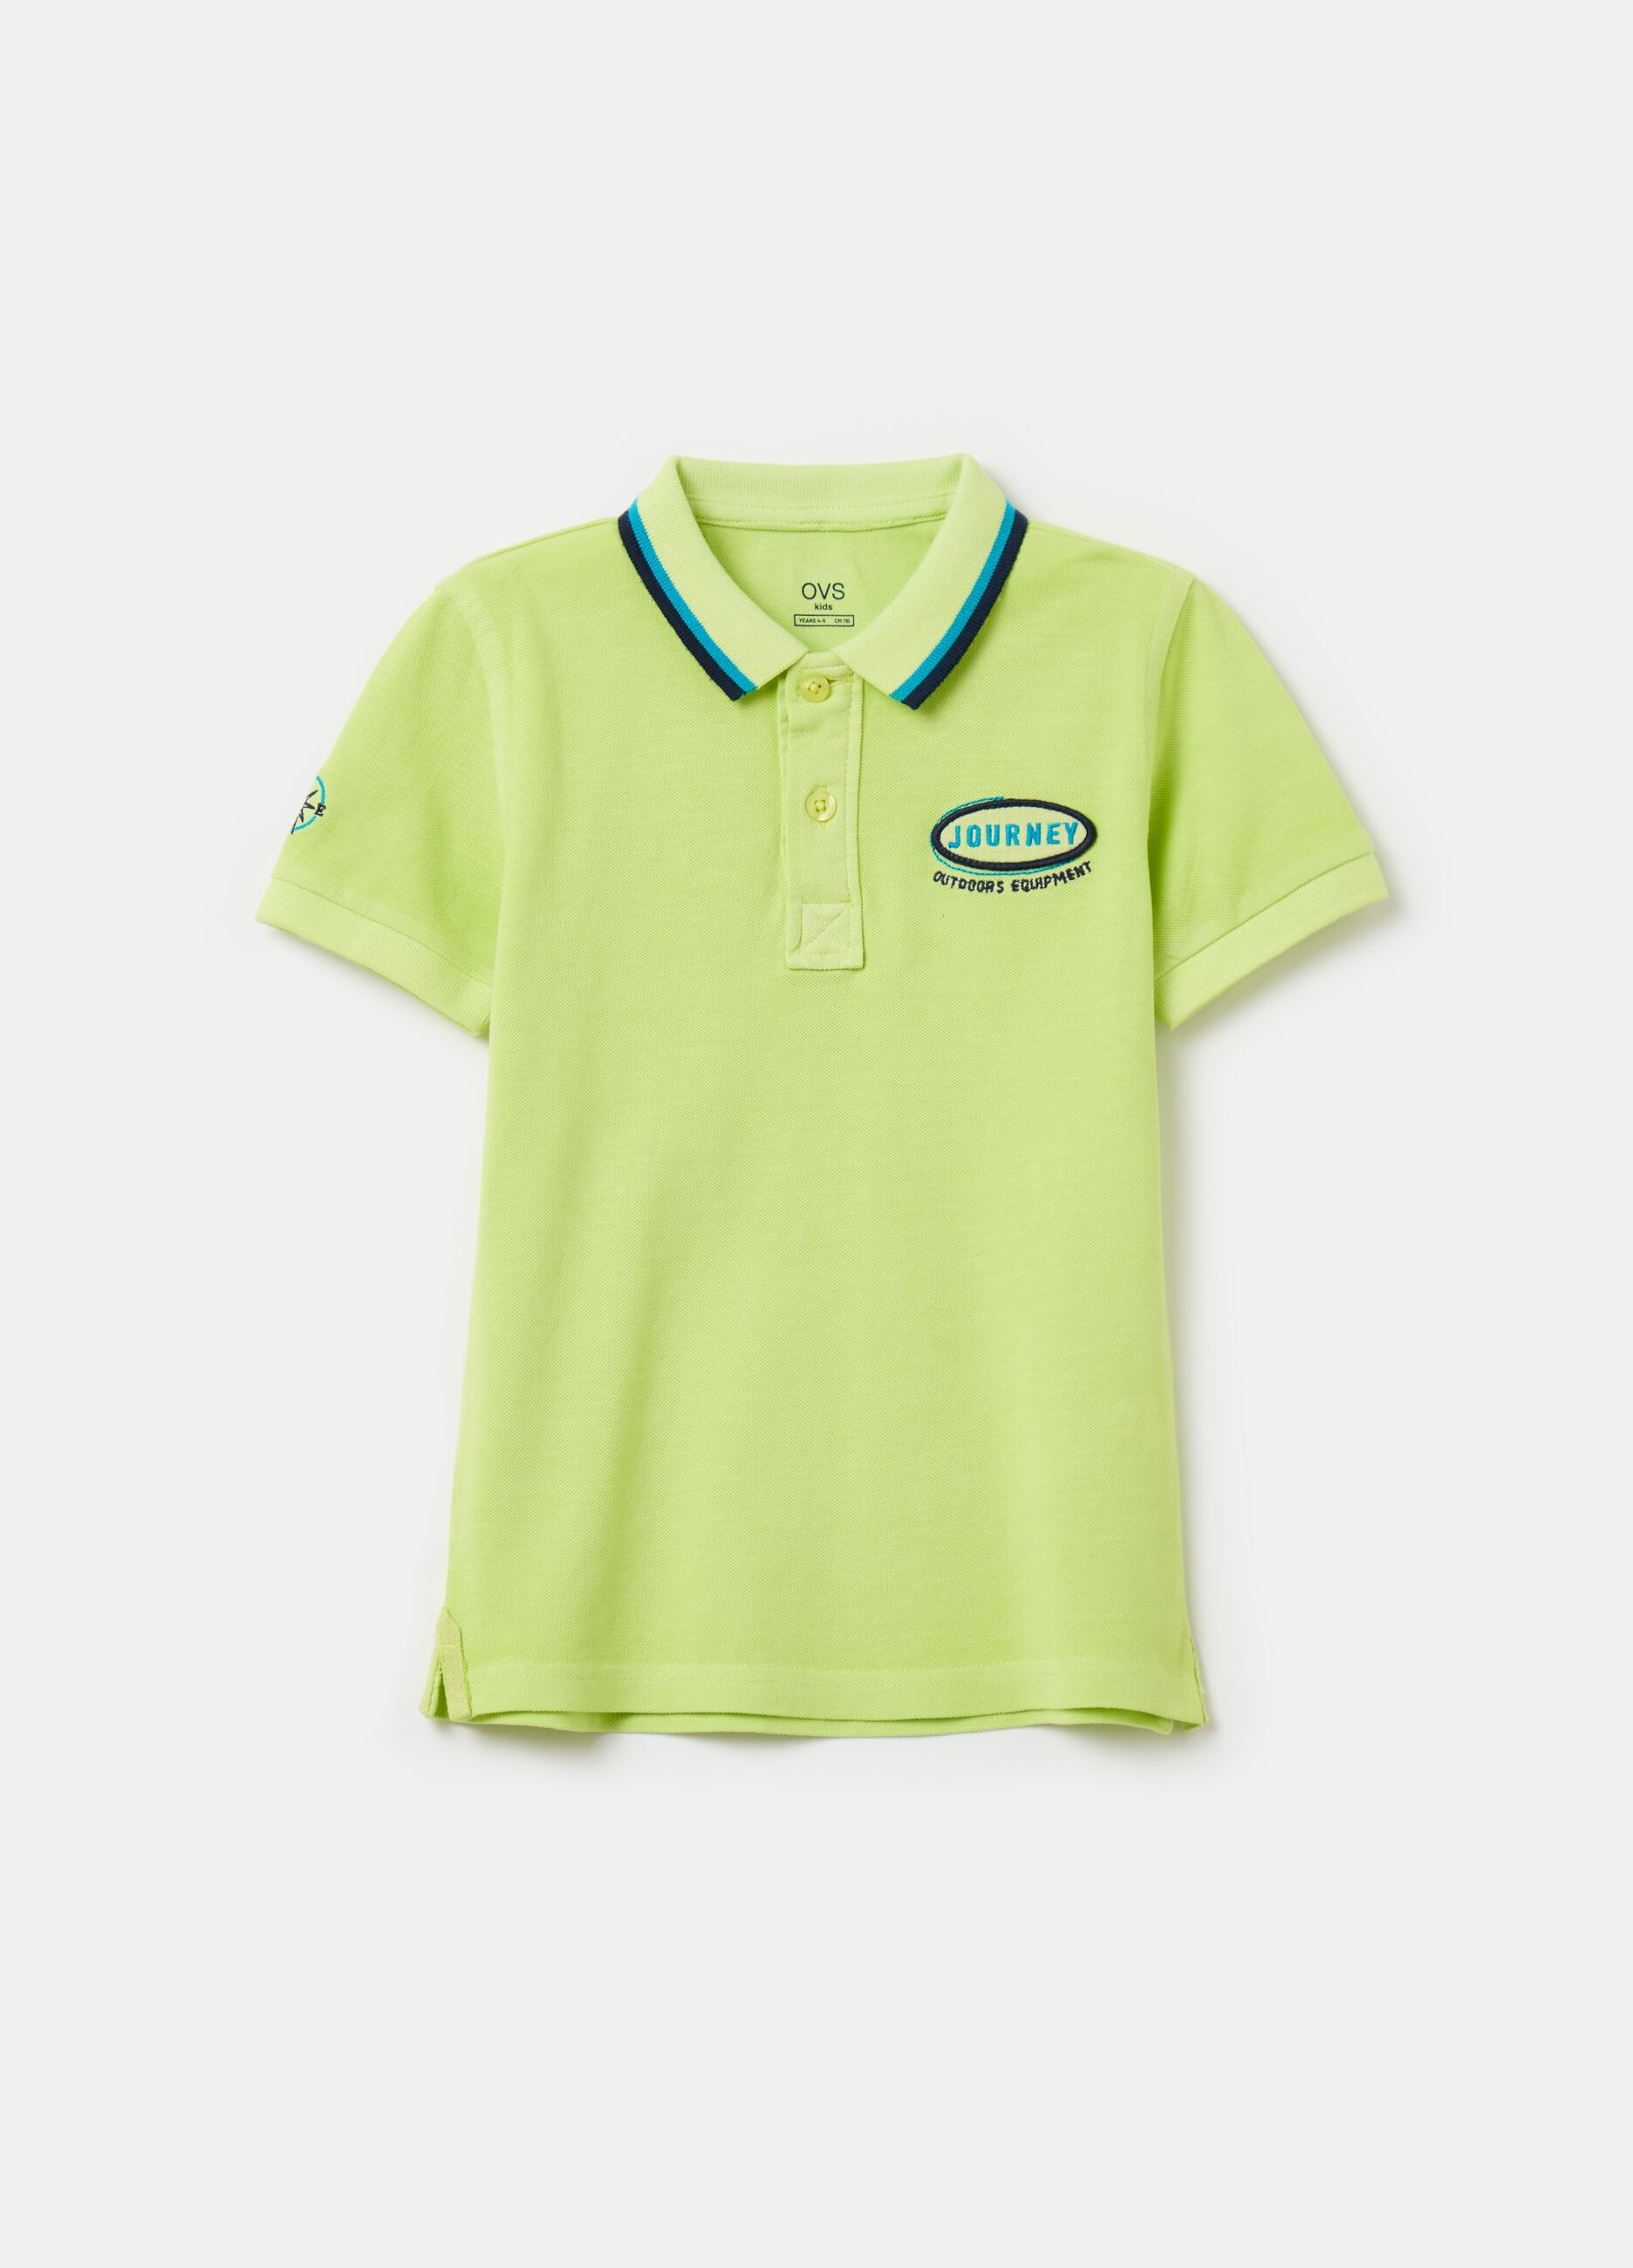 Piquet polo shirt with patch and lettering embroidery